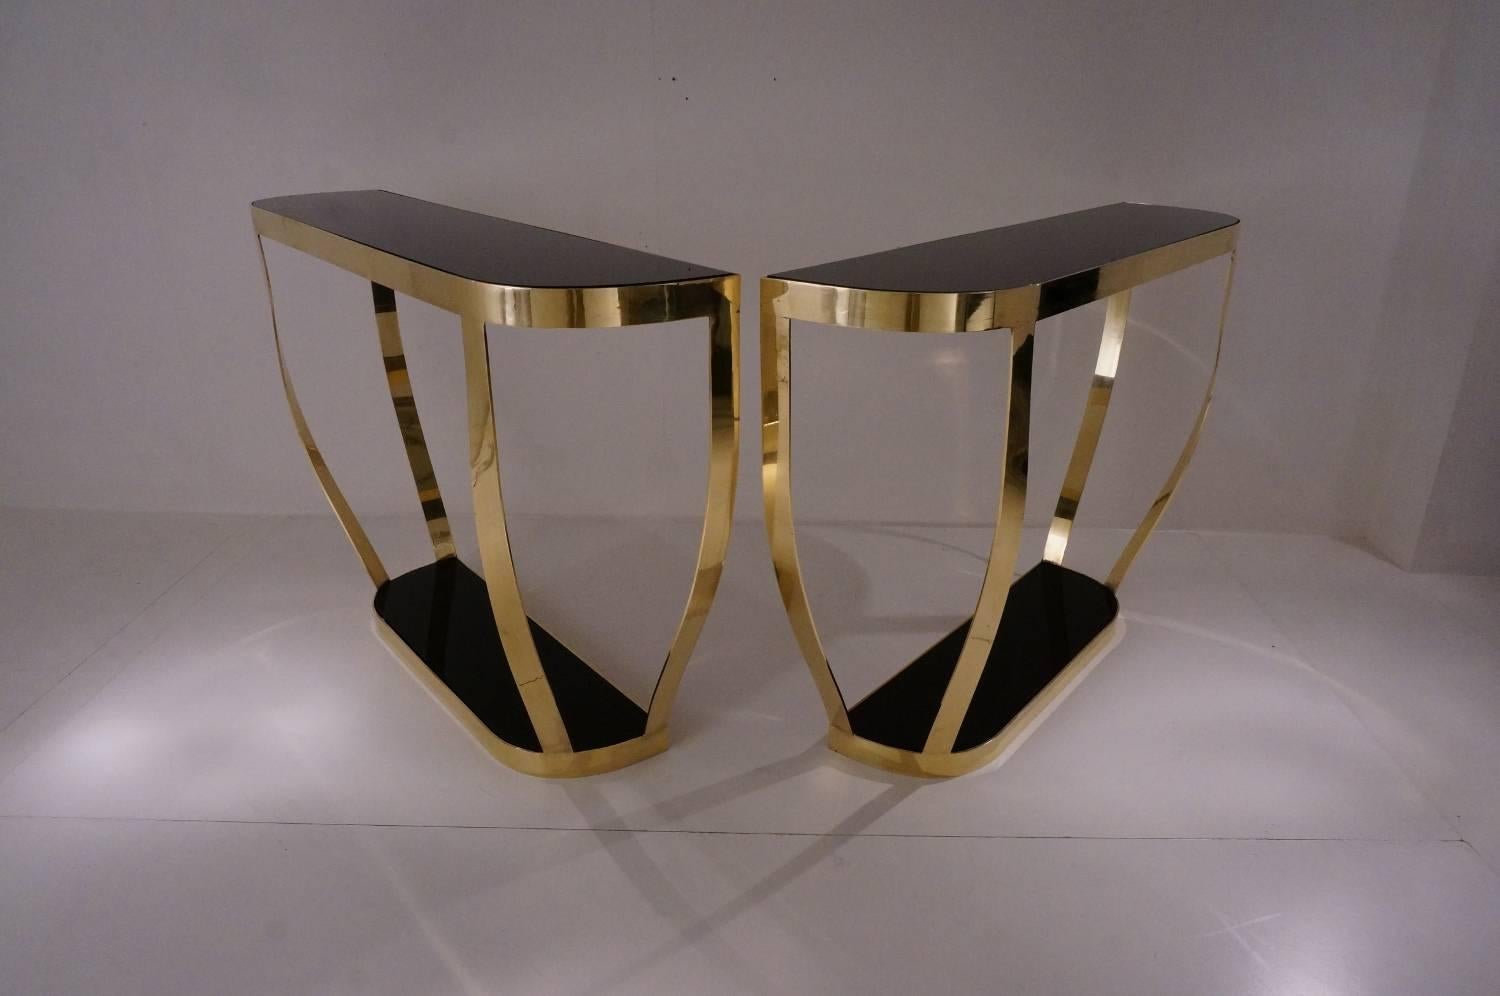 Pair of console tables, solid brass with black glass and shelf, circa 1990s, Italian.

This pair of console tables have been thoroughly cleaned respecting the original patina and are ready to use.

This pair of neoclassical console tables dating